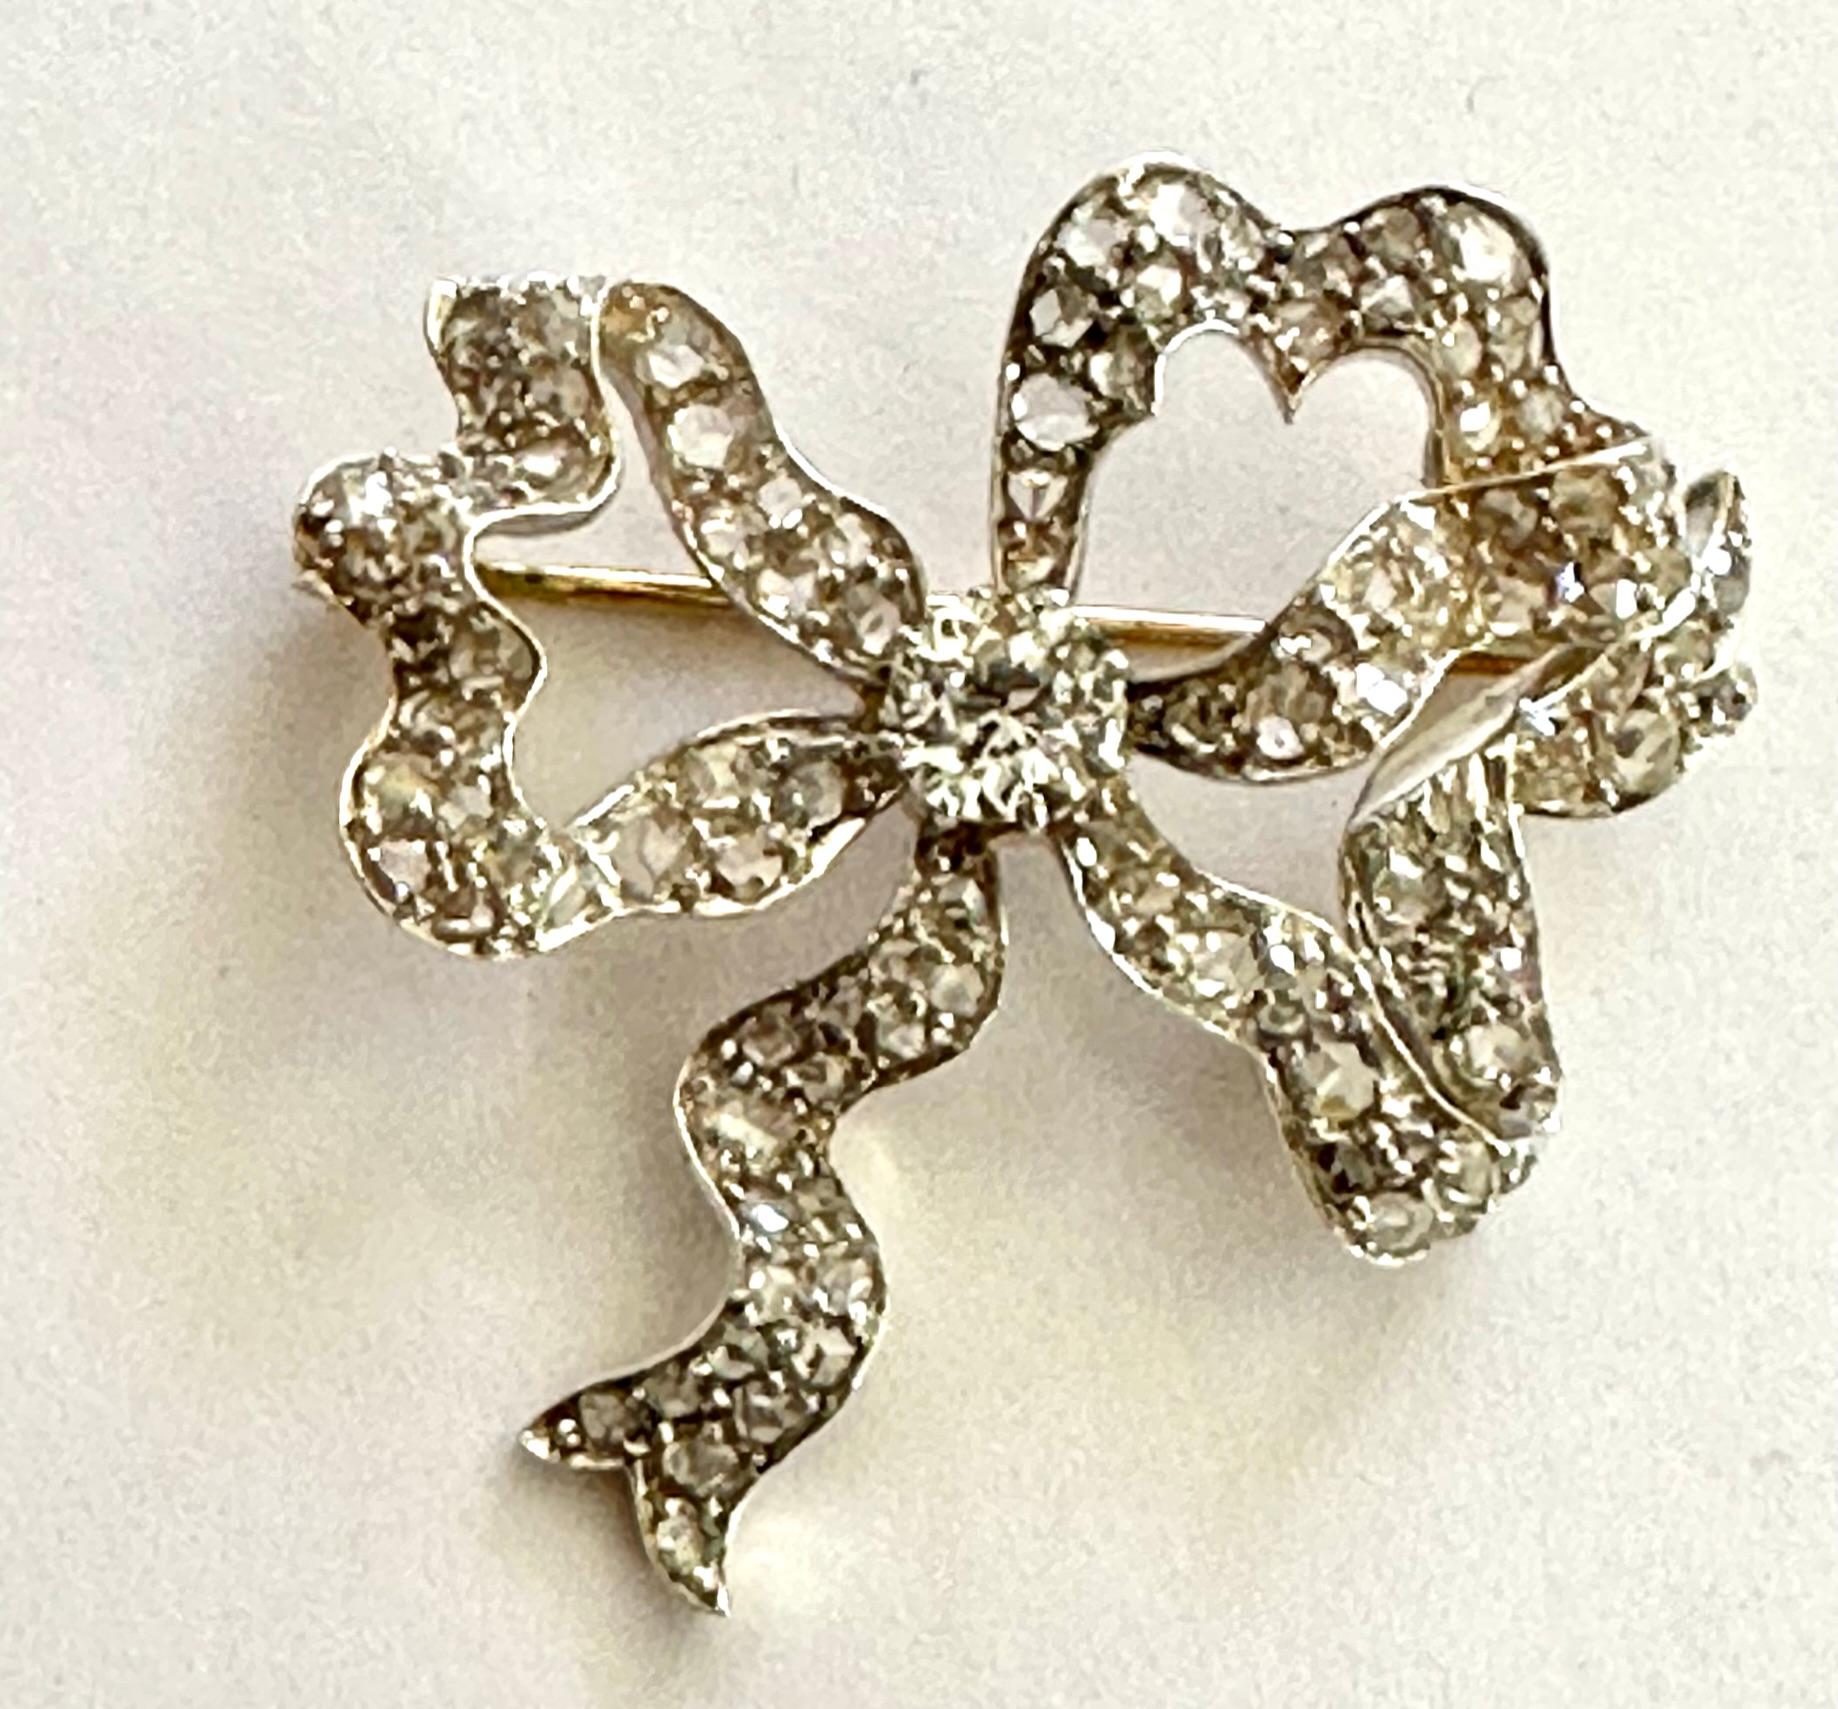 A yellow gold/silver bow brooch set with an old cut (European) diamond and 107 rose cut diamonds
1 old european cut diamond: 0.70 ct P1 J.
107 rose cut diamonds together weigh: 1.40 ct, various qualities.
This elegant brooch was made around 1900 in